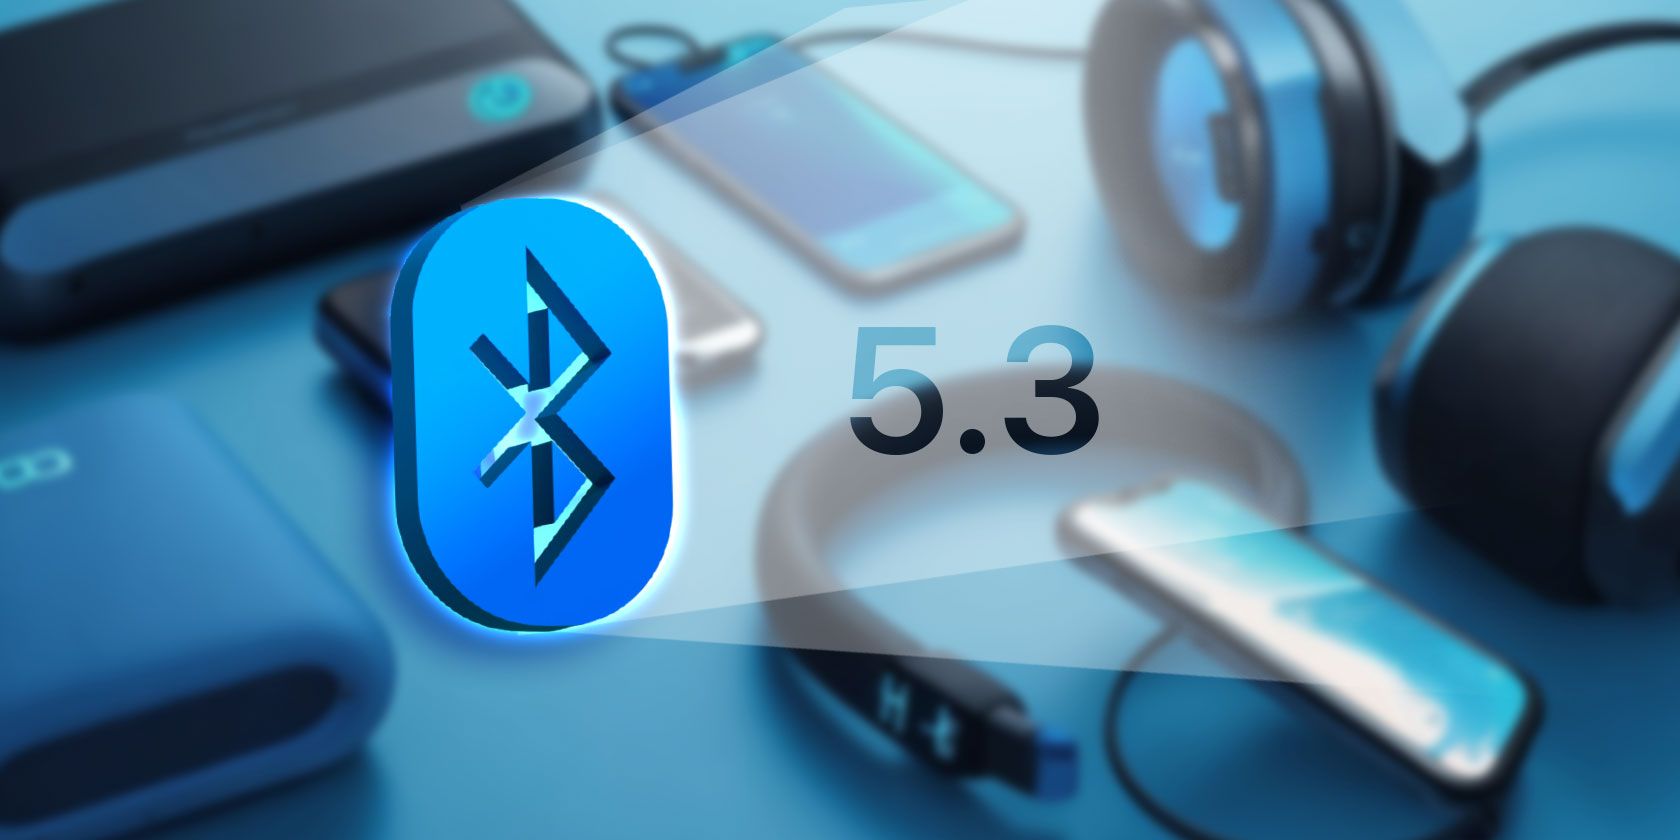 From iPhoneIslam.com, the Bluetooth 5.3 logo is prominently displayed with various devices such as smartphones, smartwatch and AirPods in the background.